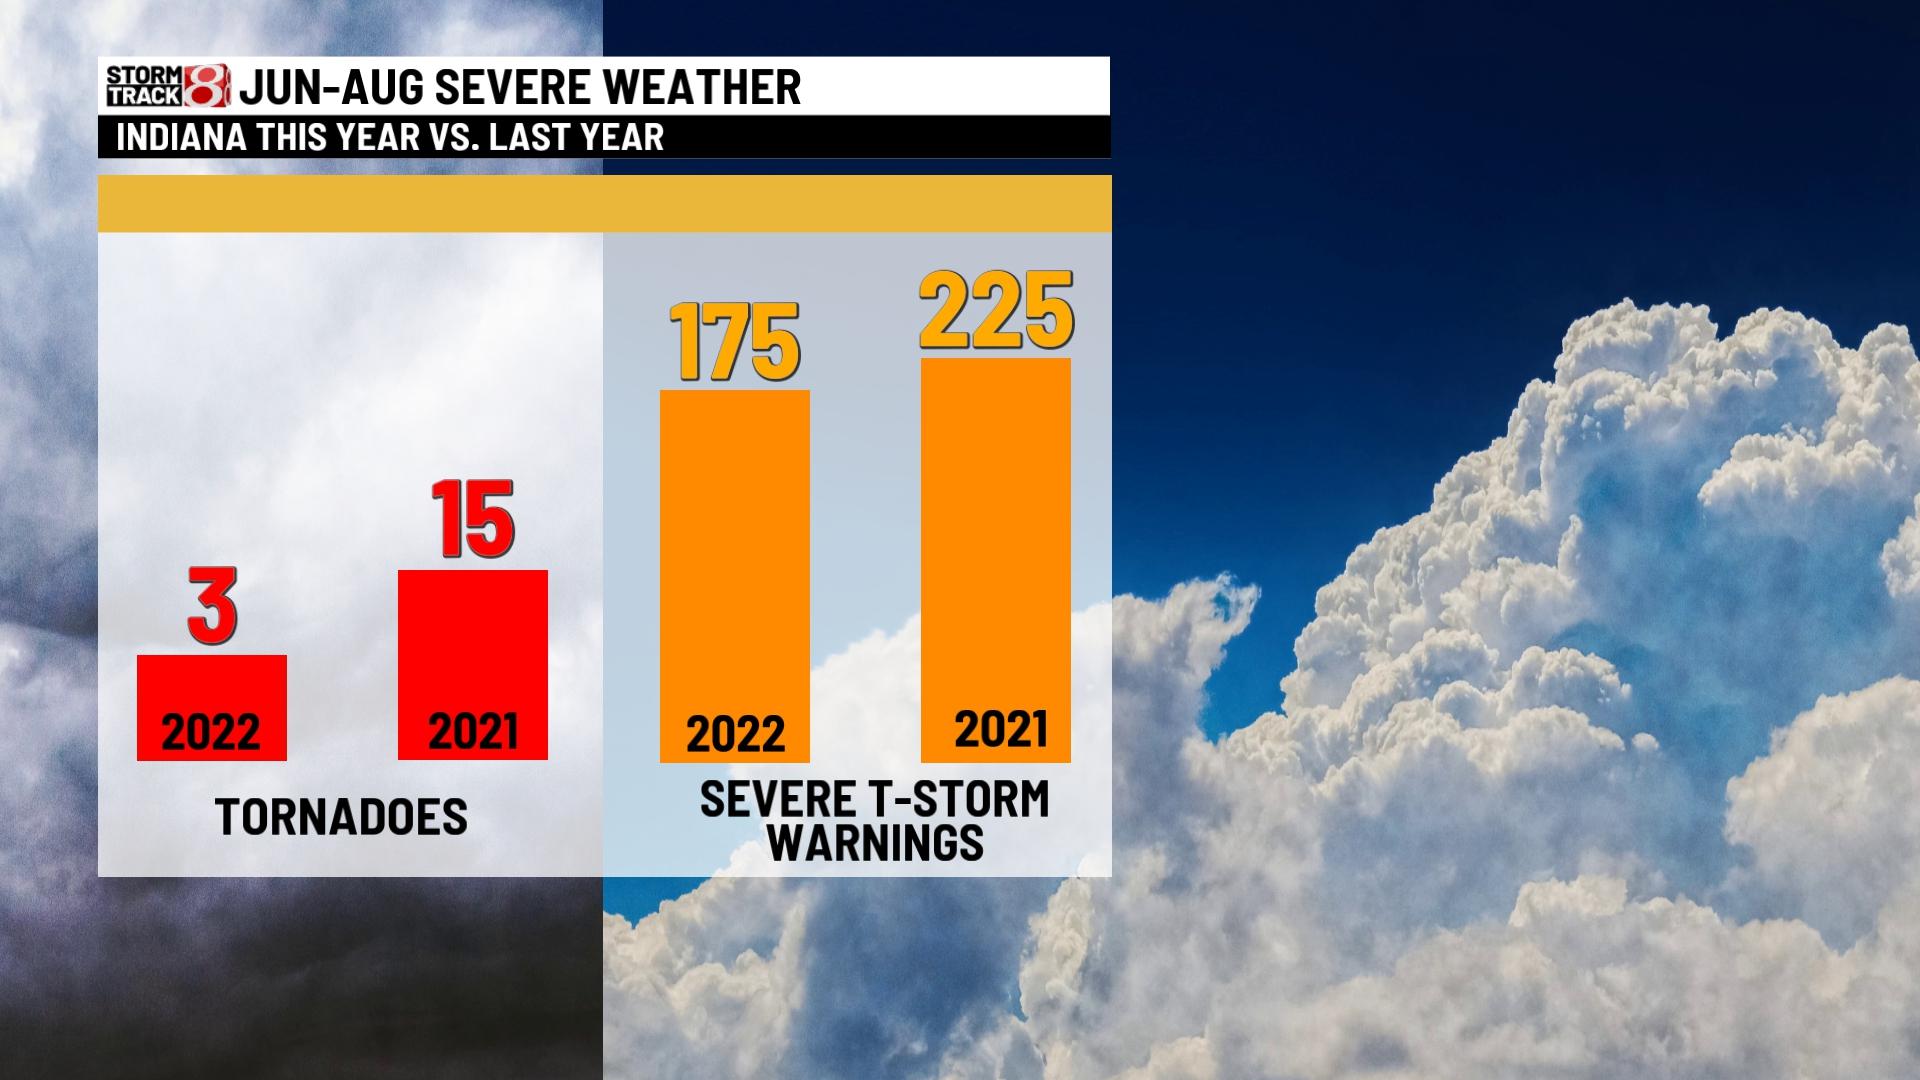 A comparison of summer severe weather for 2021, 2022 in Indiana